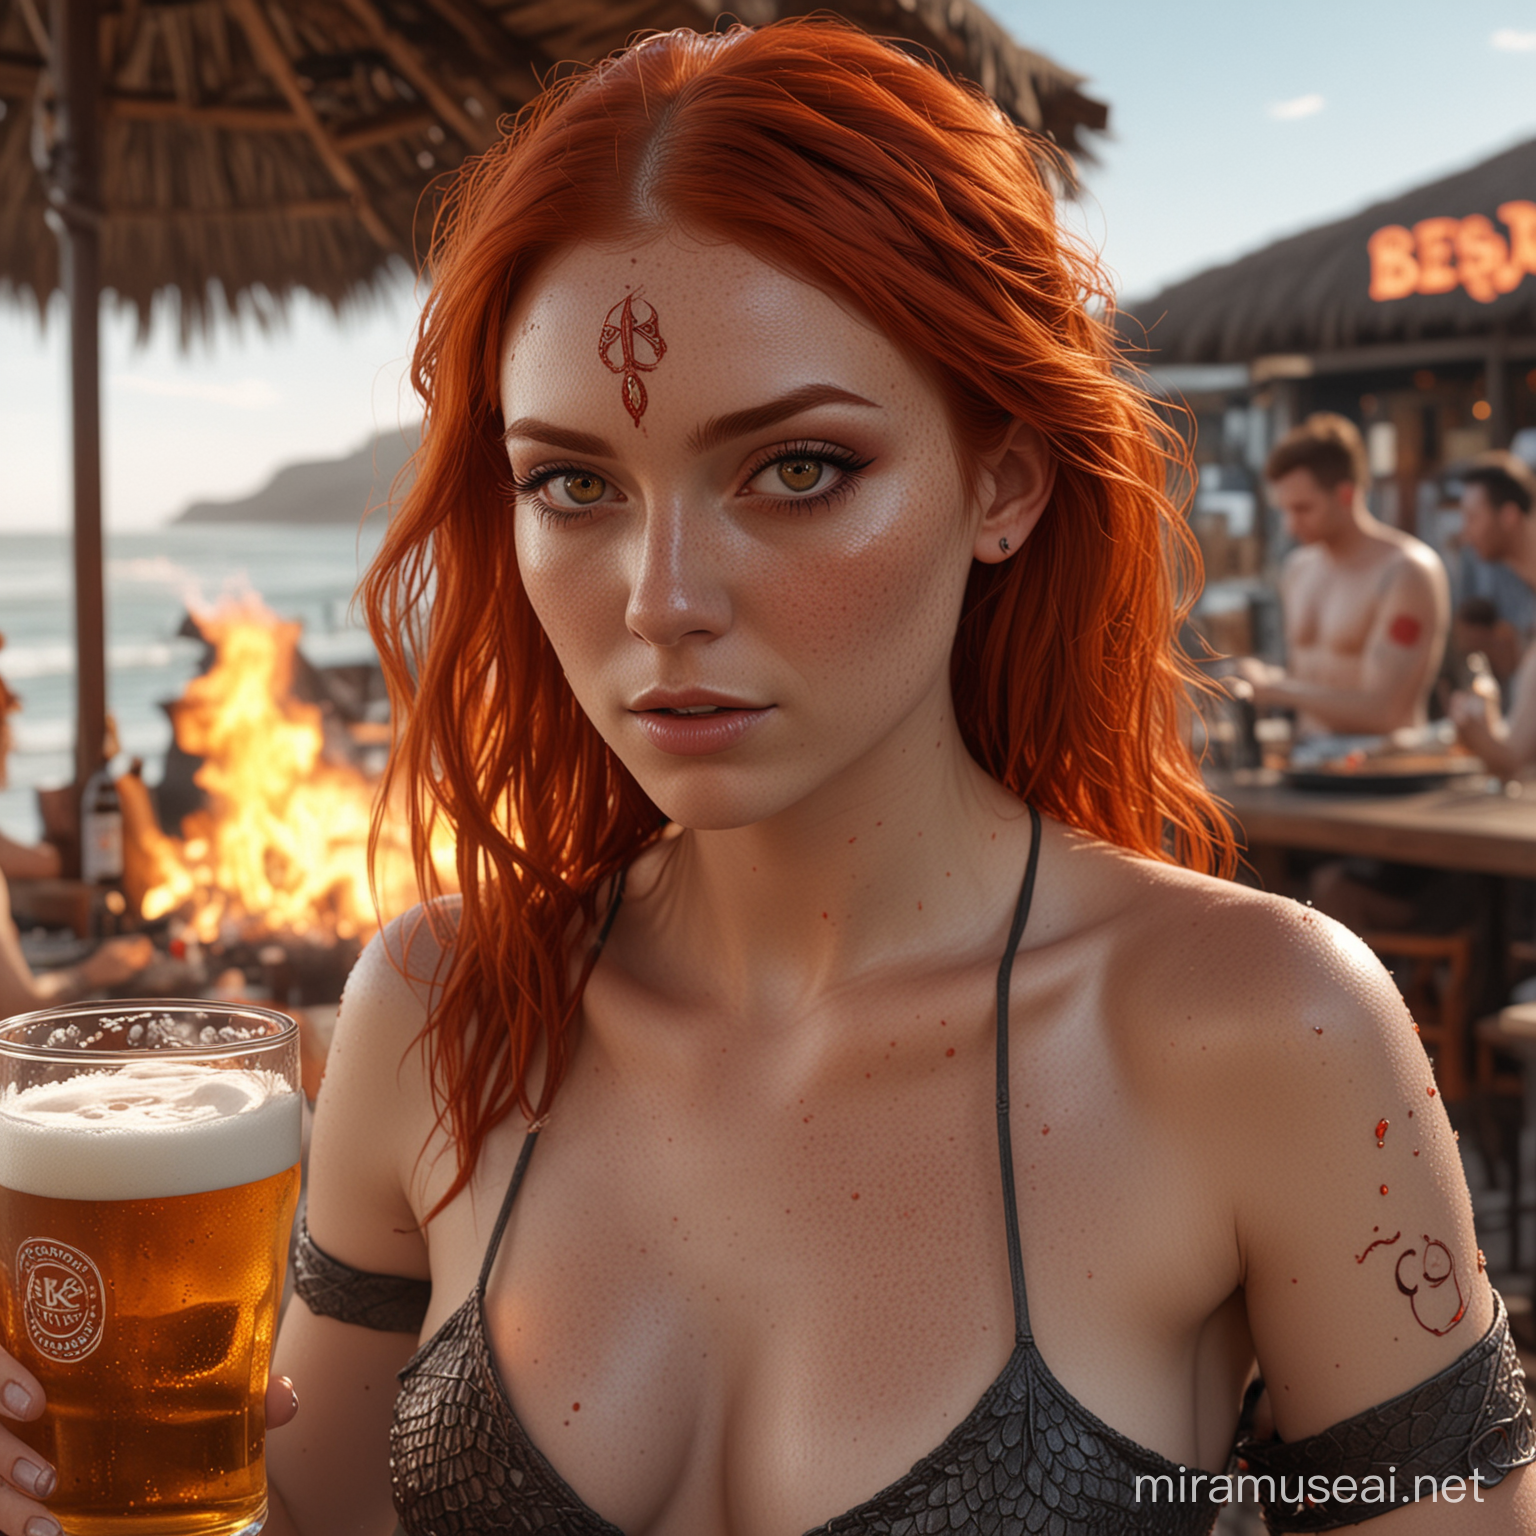 hyperrealistic very high detail 4k full body photograph taken from the left with depth perception, showing a female human with long fiery red hair thin red eyebrows, burning red eyes and face full of freckles, with draconic symbols carved into skin and dragon scales on arms and body, at a beach bar with a beer